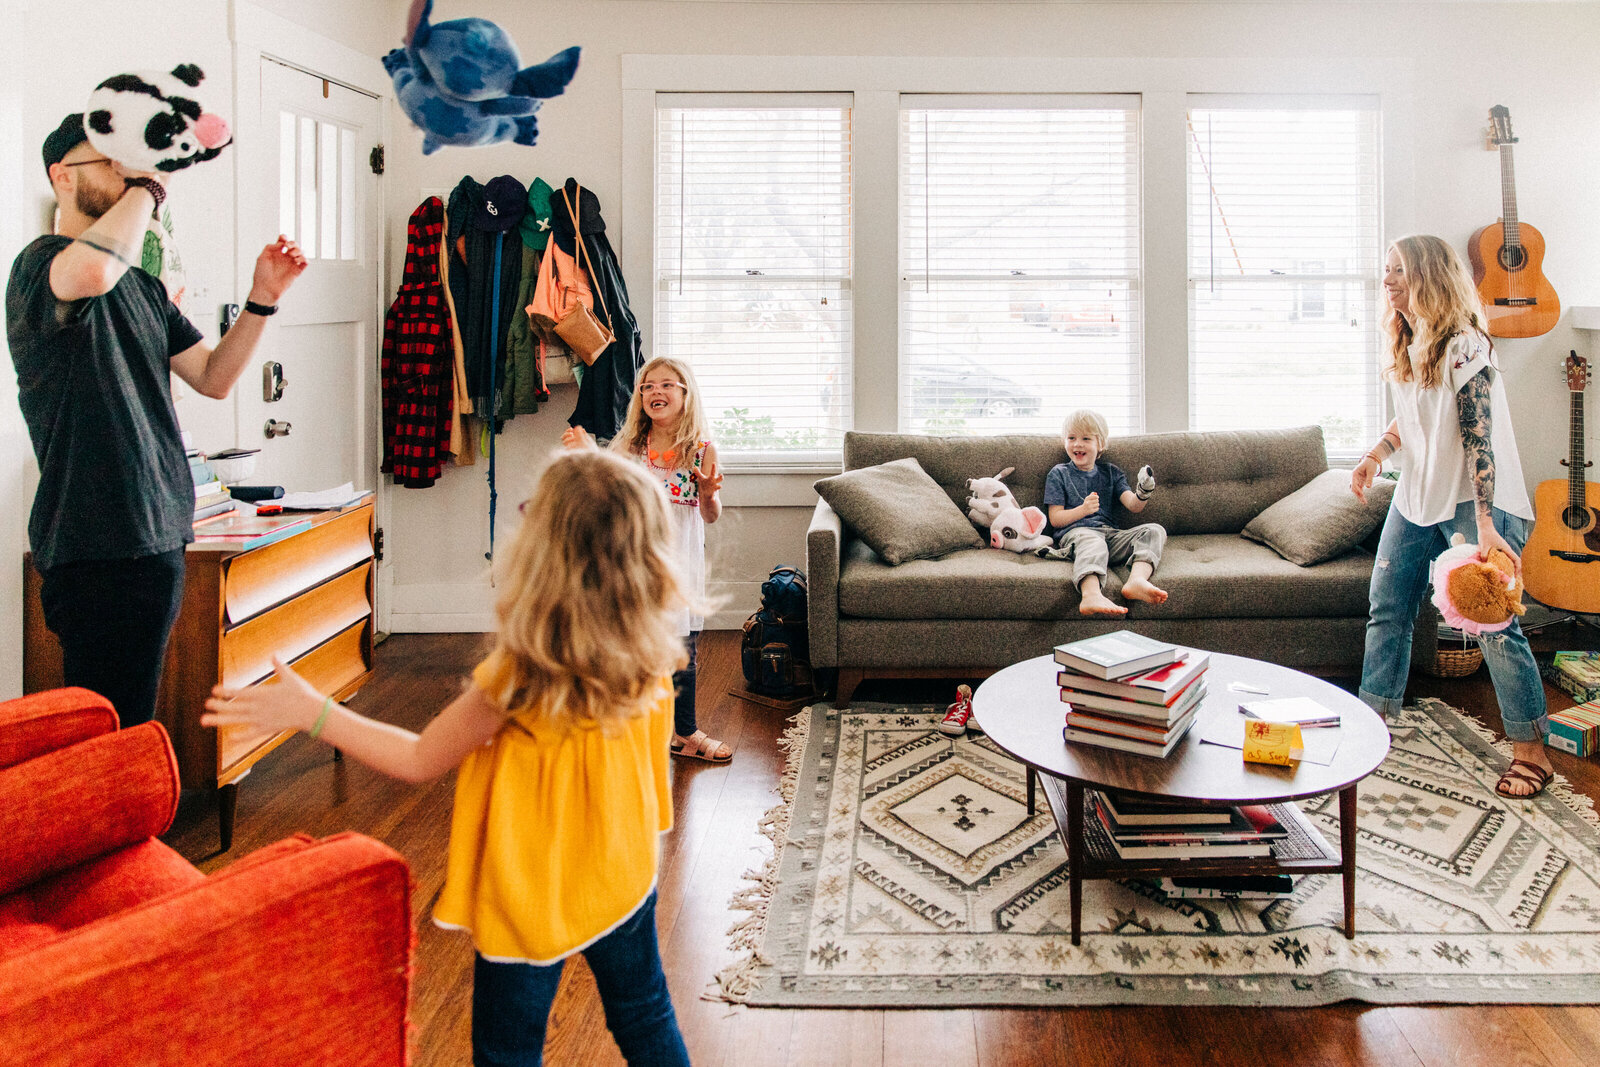 family in their colorful mid century modern living room tossing a stuffed animal between them